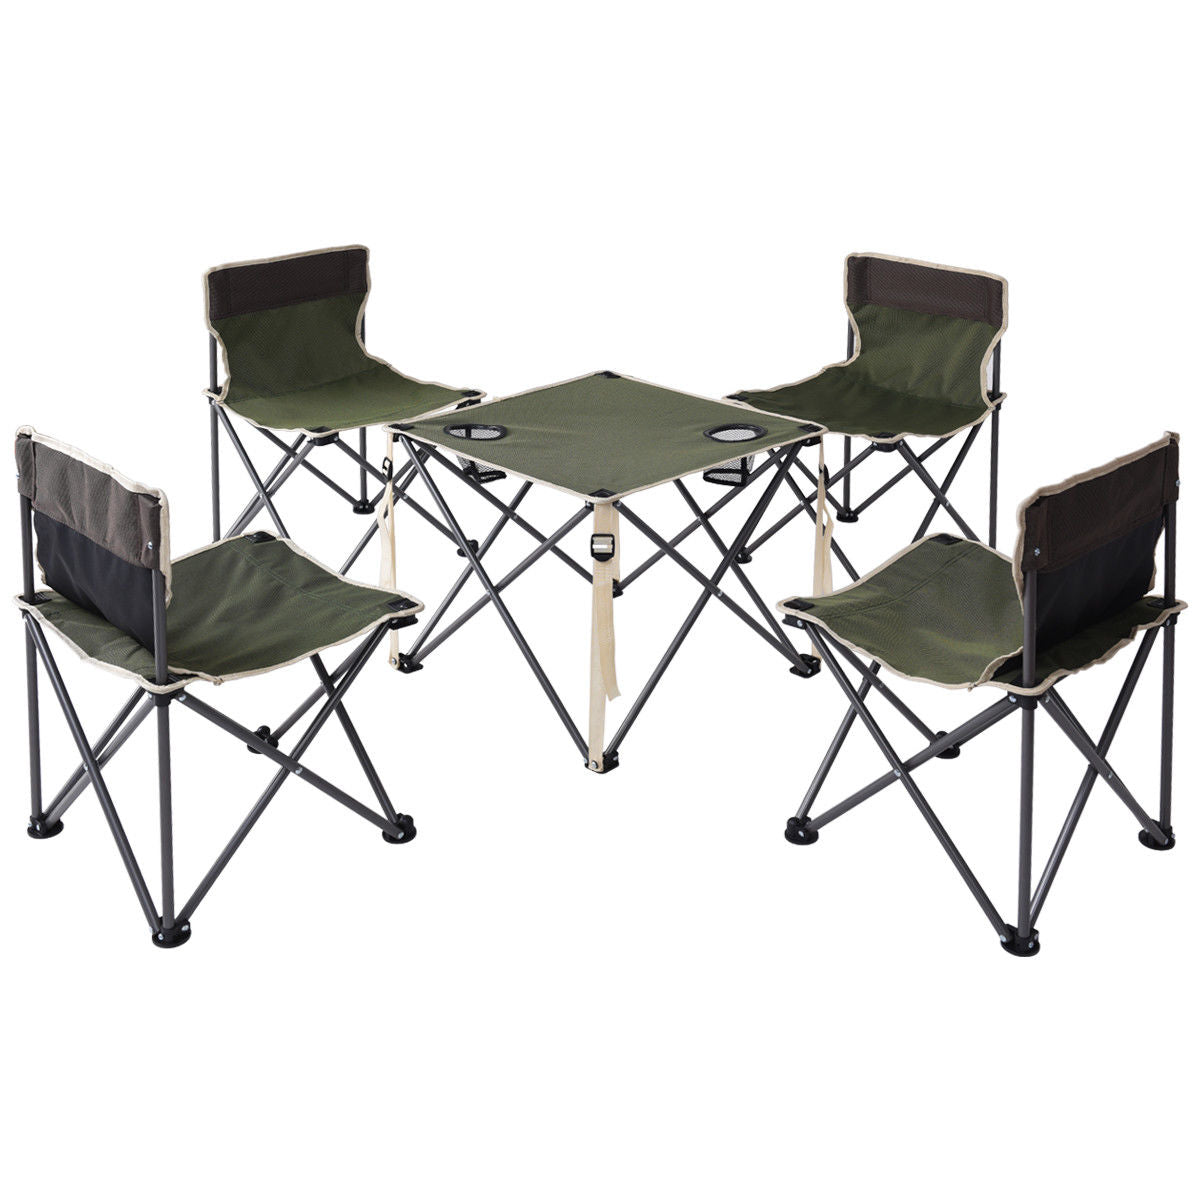 Natural Elements By L Green Portable Outdoor Folding Table